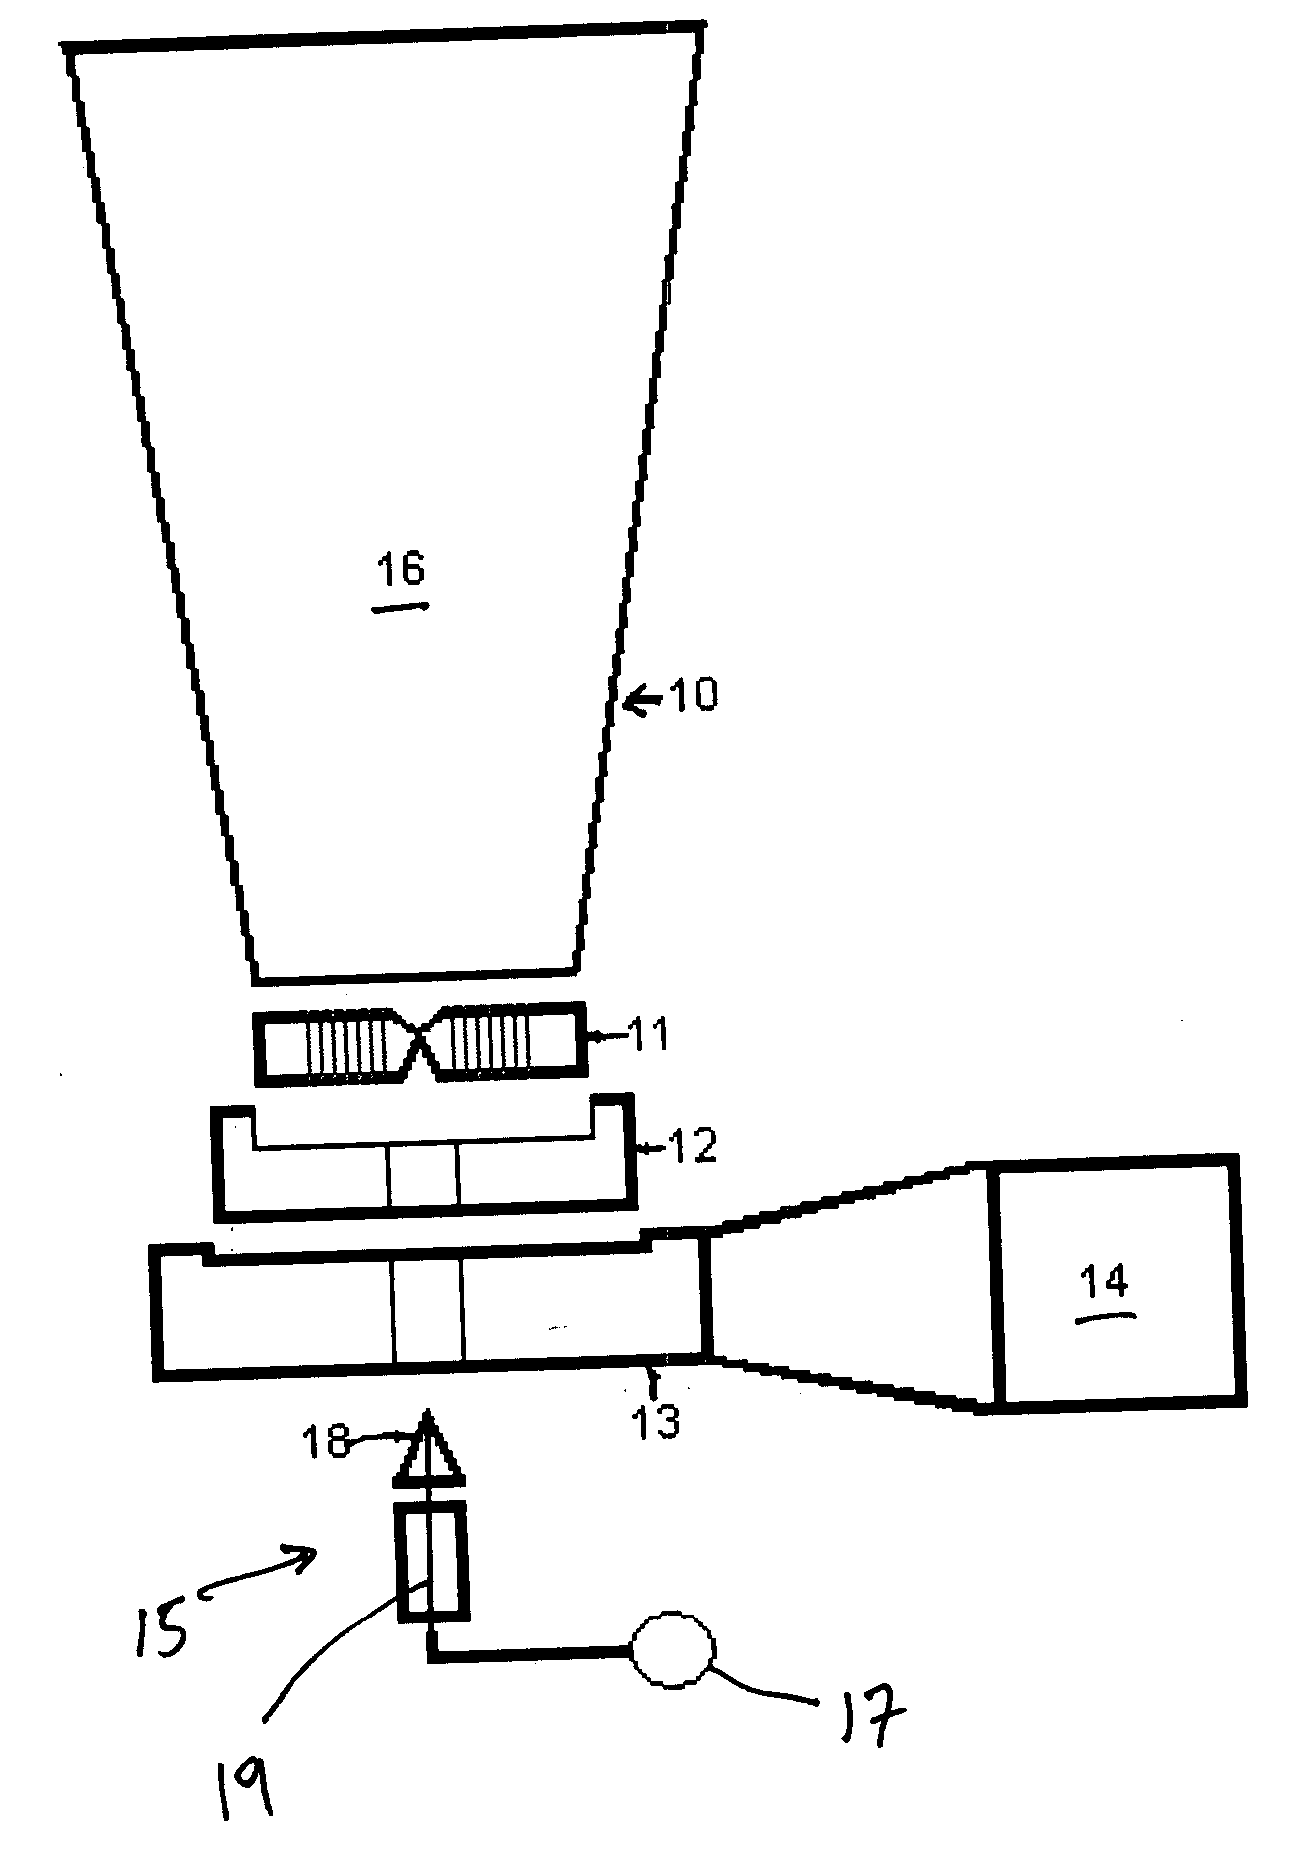 Ultrasonic nozzle for coating a medical appliance and method for using an ultrasonic nozzle to coat a medical appliance